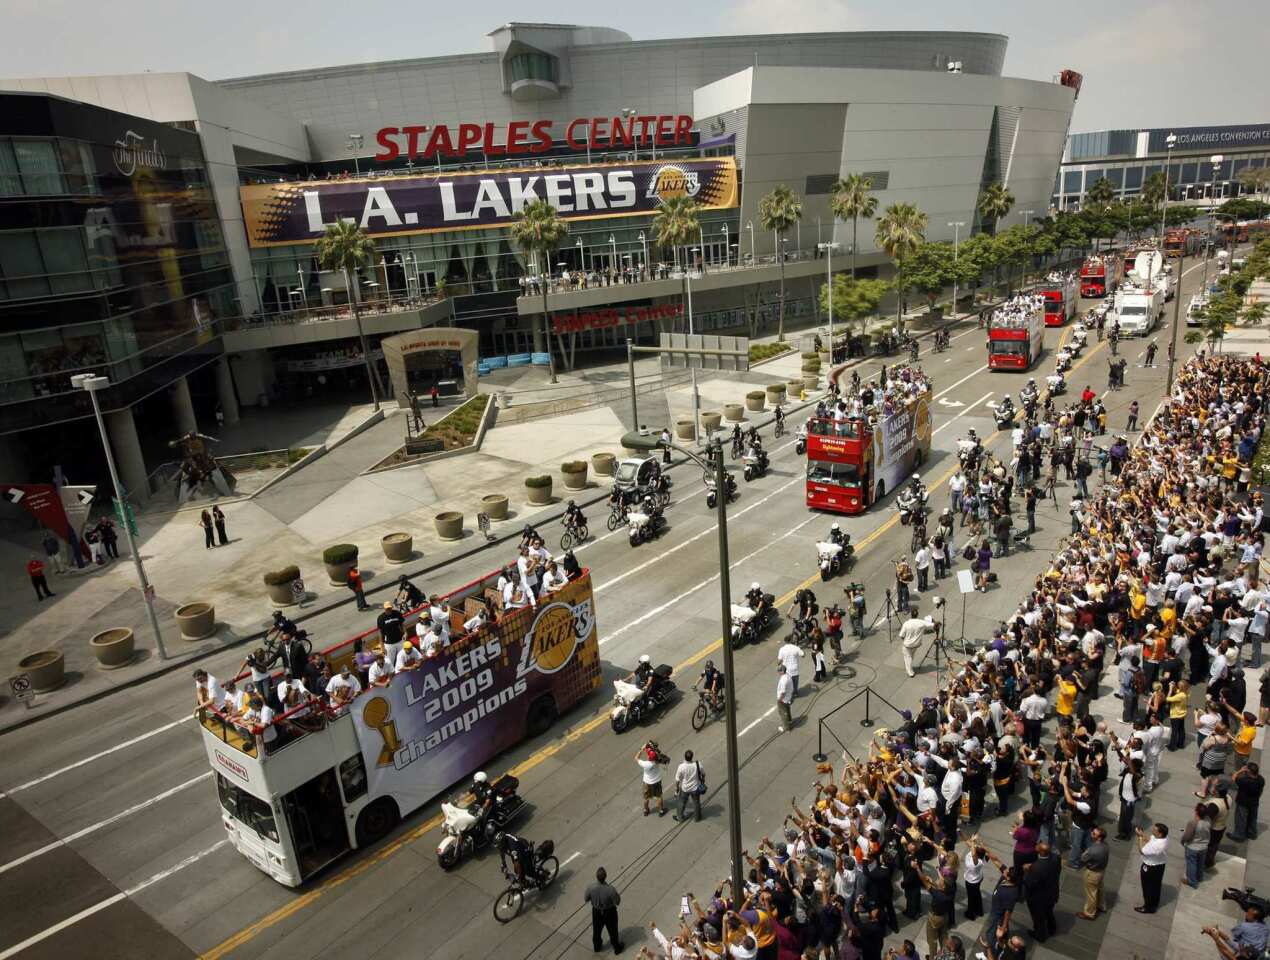 The L.A. Lakers travel past Staples Center during the team's victory parade in June 2009. AEG holds a minority stake in the Lakers.